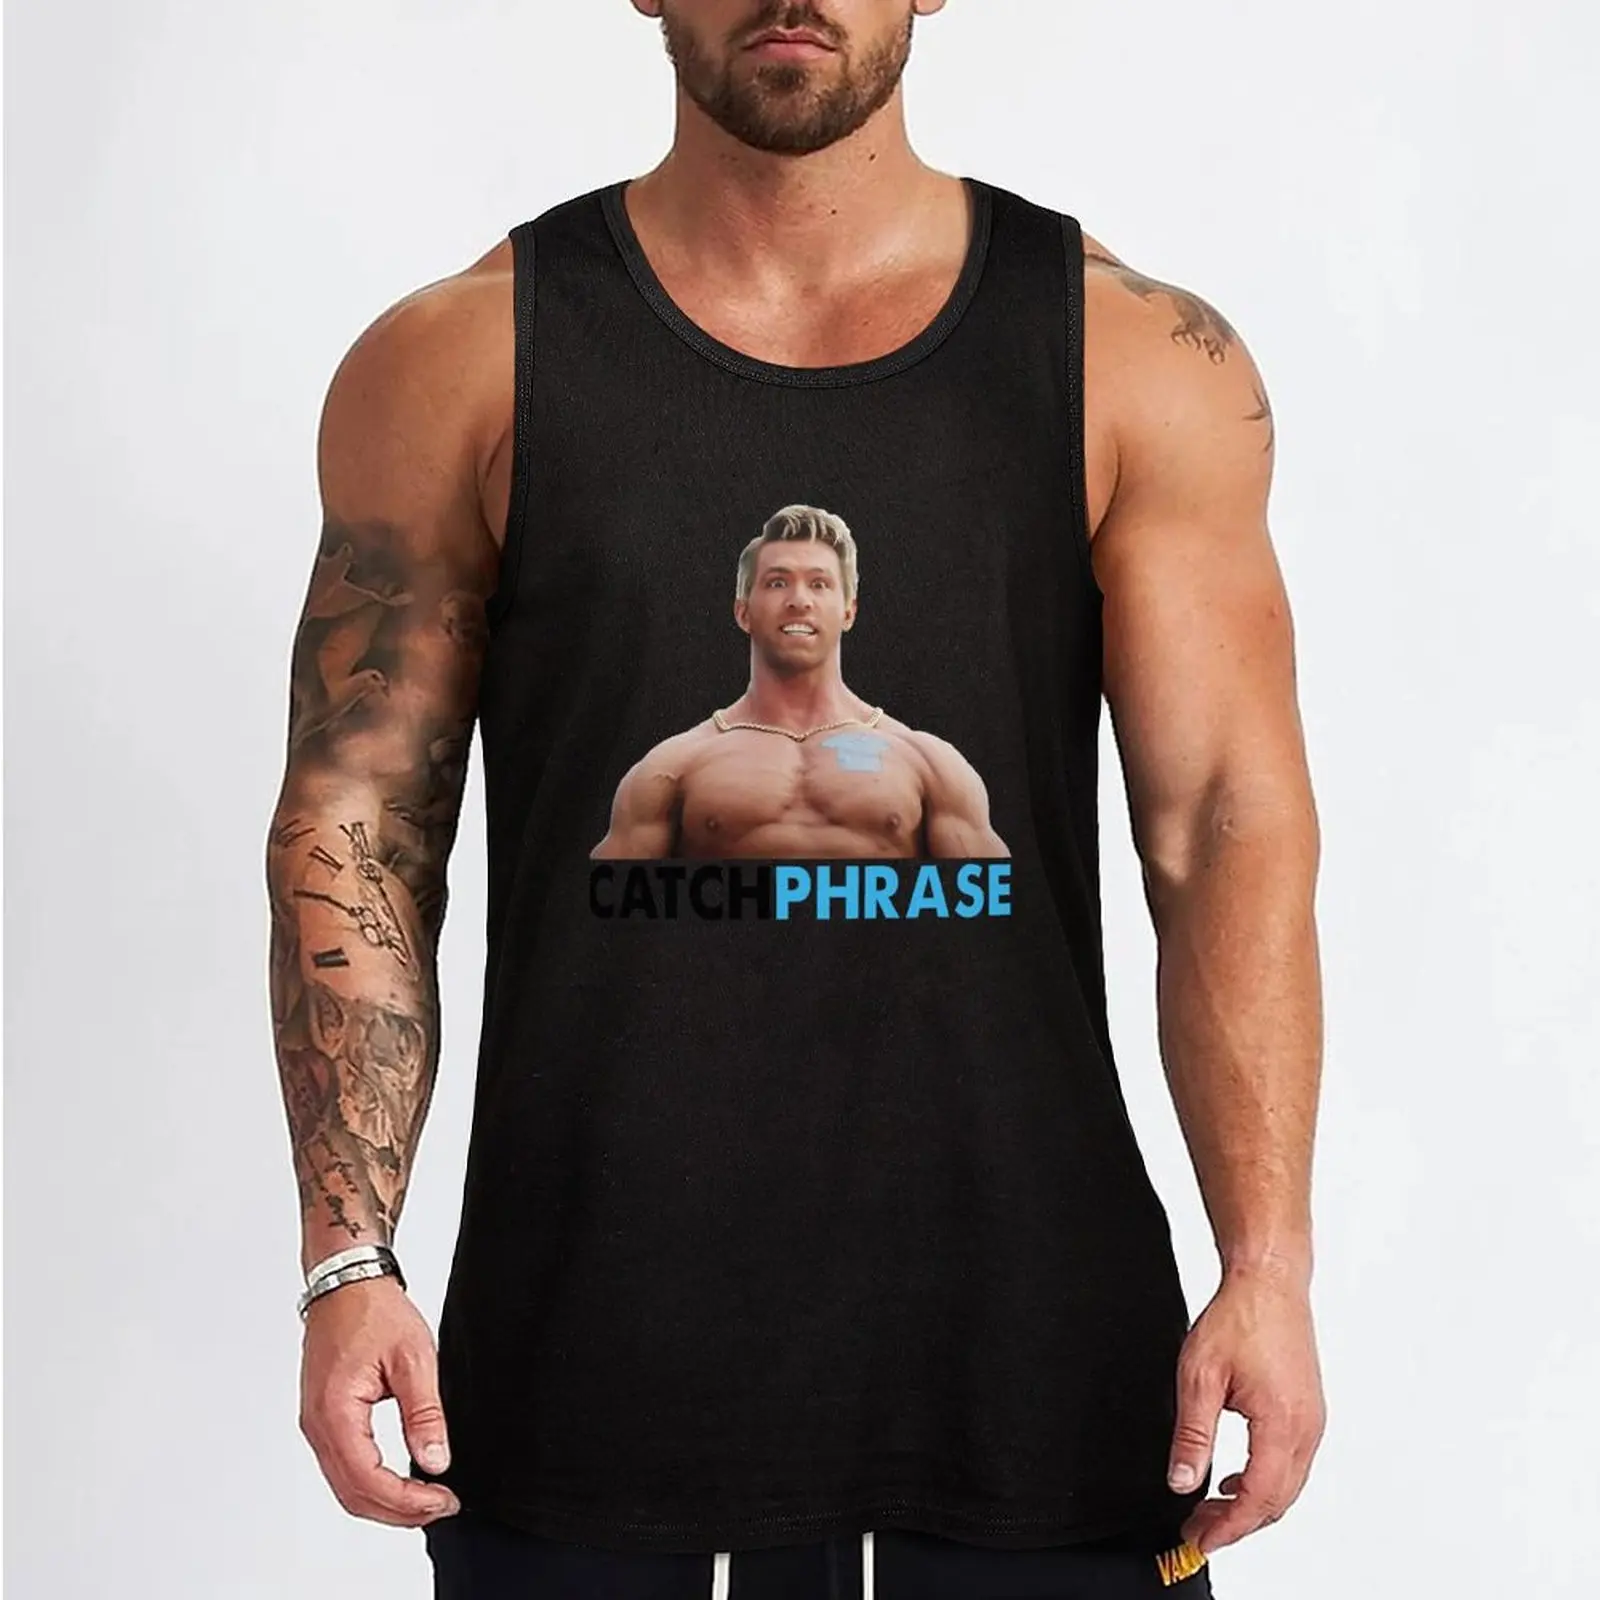 https://ae01.alicdn.com/kf/See03a0e260284e6582d0998edc6f2438Q/New-Funny-Gifts-For-Free-Guy-Catchphrase-Ryan-Reynolds-Gift-For-Fans-Tank-Top-Gym-man.jpg